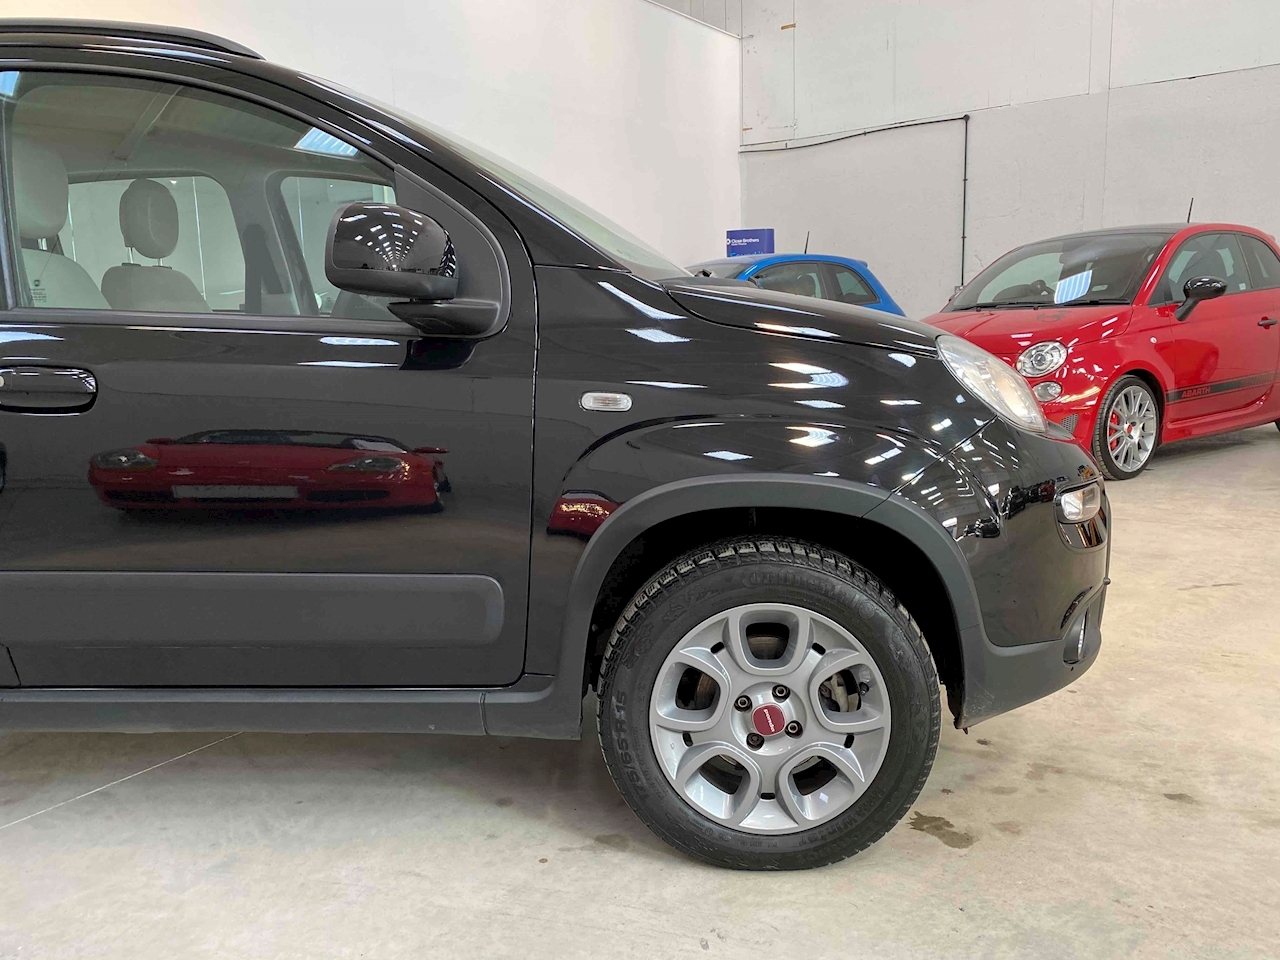 Used 2016 Fiat Panda Twinair Hatchback 0.9 Manual Petrol For Sale in West  Sussex